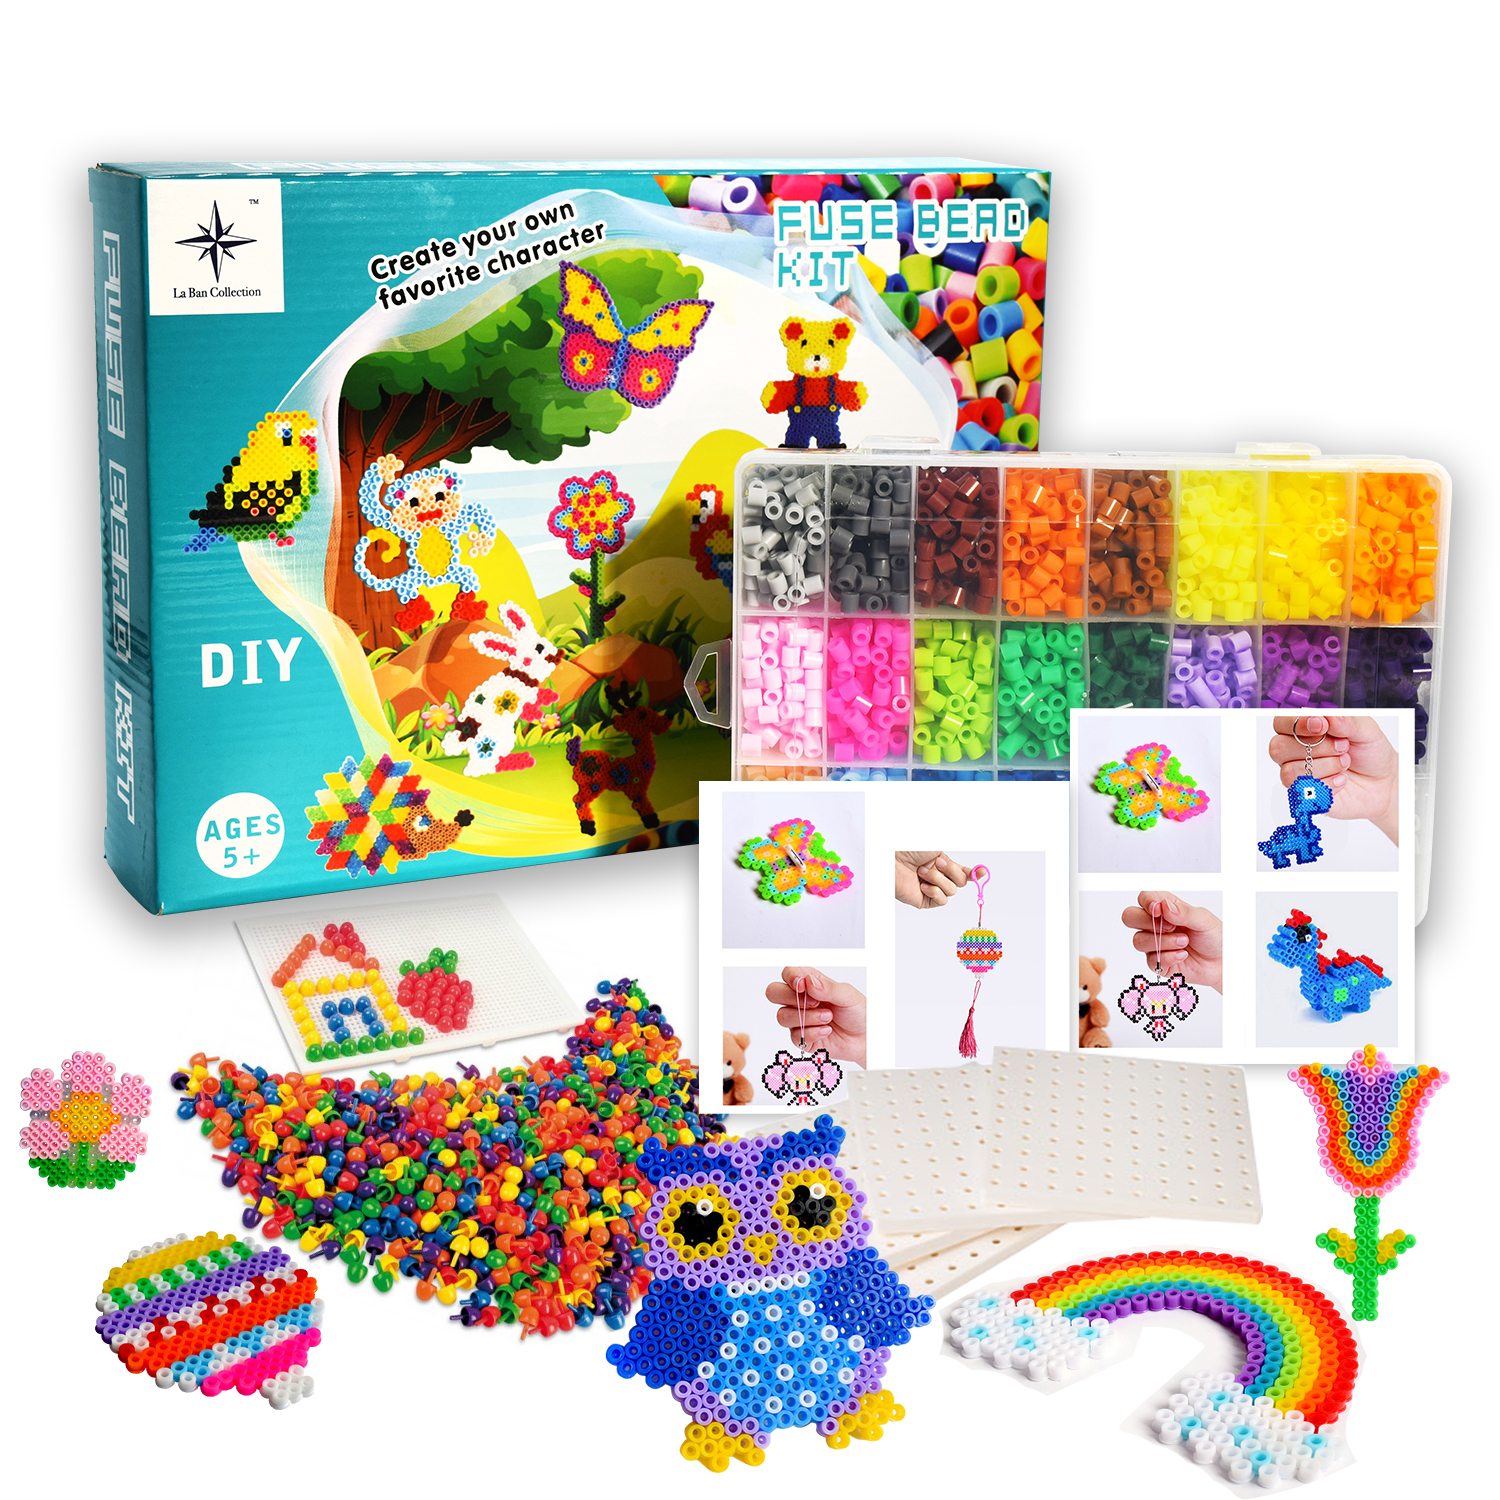 Toys Water Fuse Beads Kit for Kids Craft Art 5mm Beads DIY Melting Beads  Set Pixel Beads Art Kit Create Your Favorite Magical Figures by Perler Beads  - China Perler Beads and